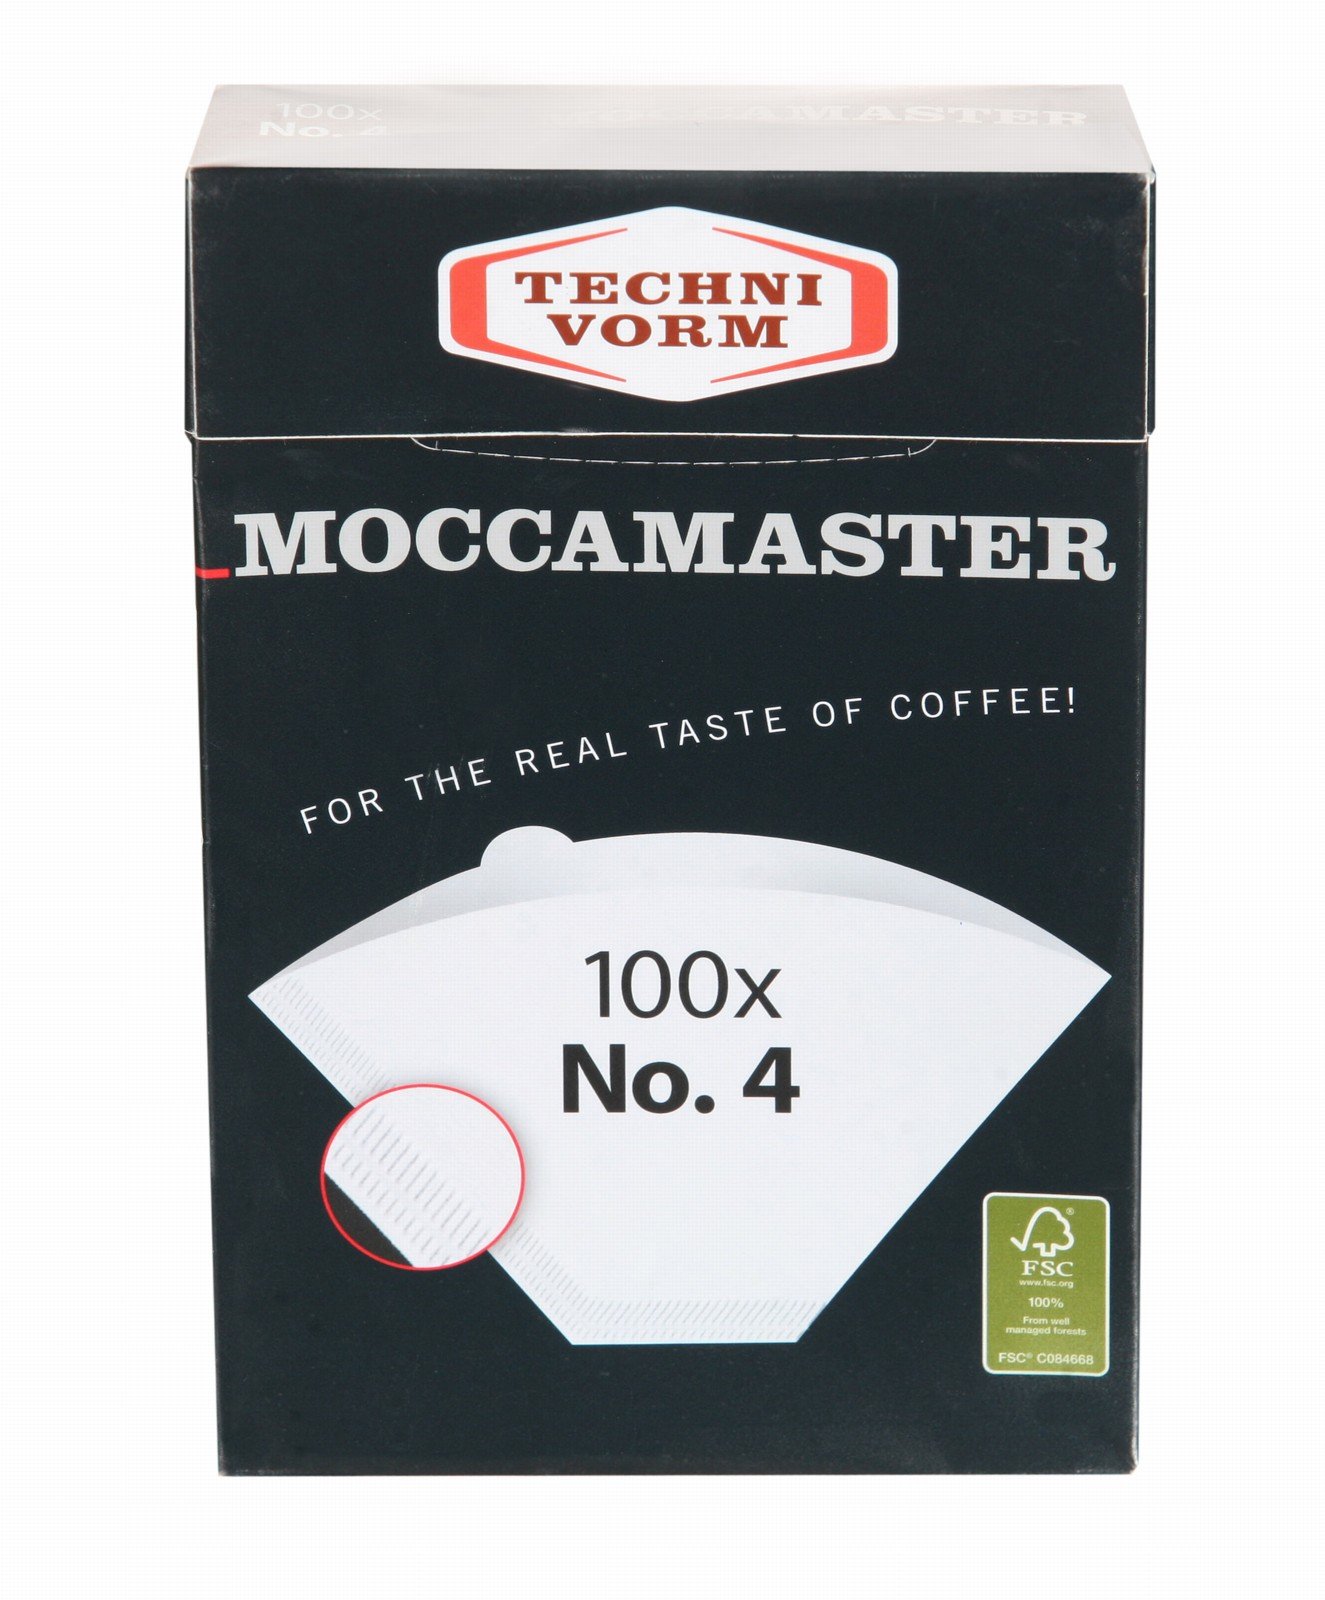 Moccamaster Coffee Filter white Nr. 4 (100 pieces)